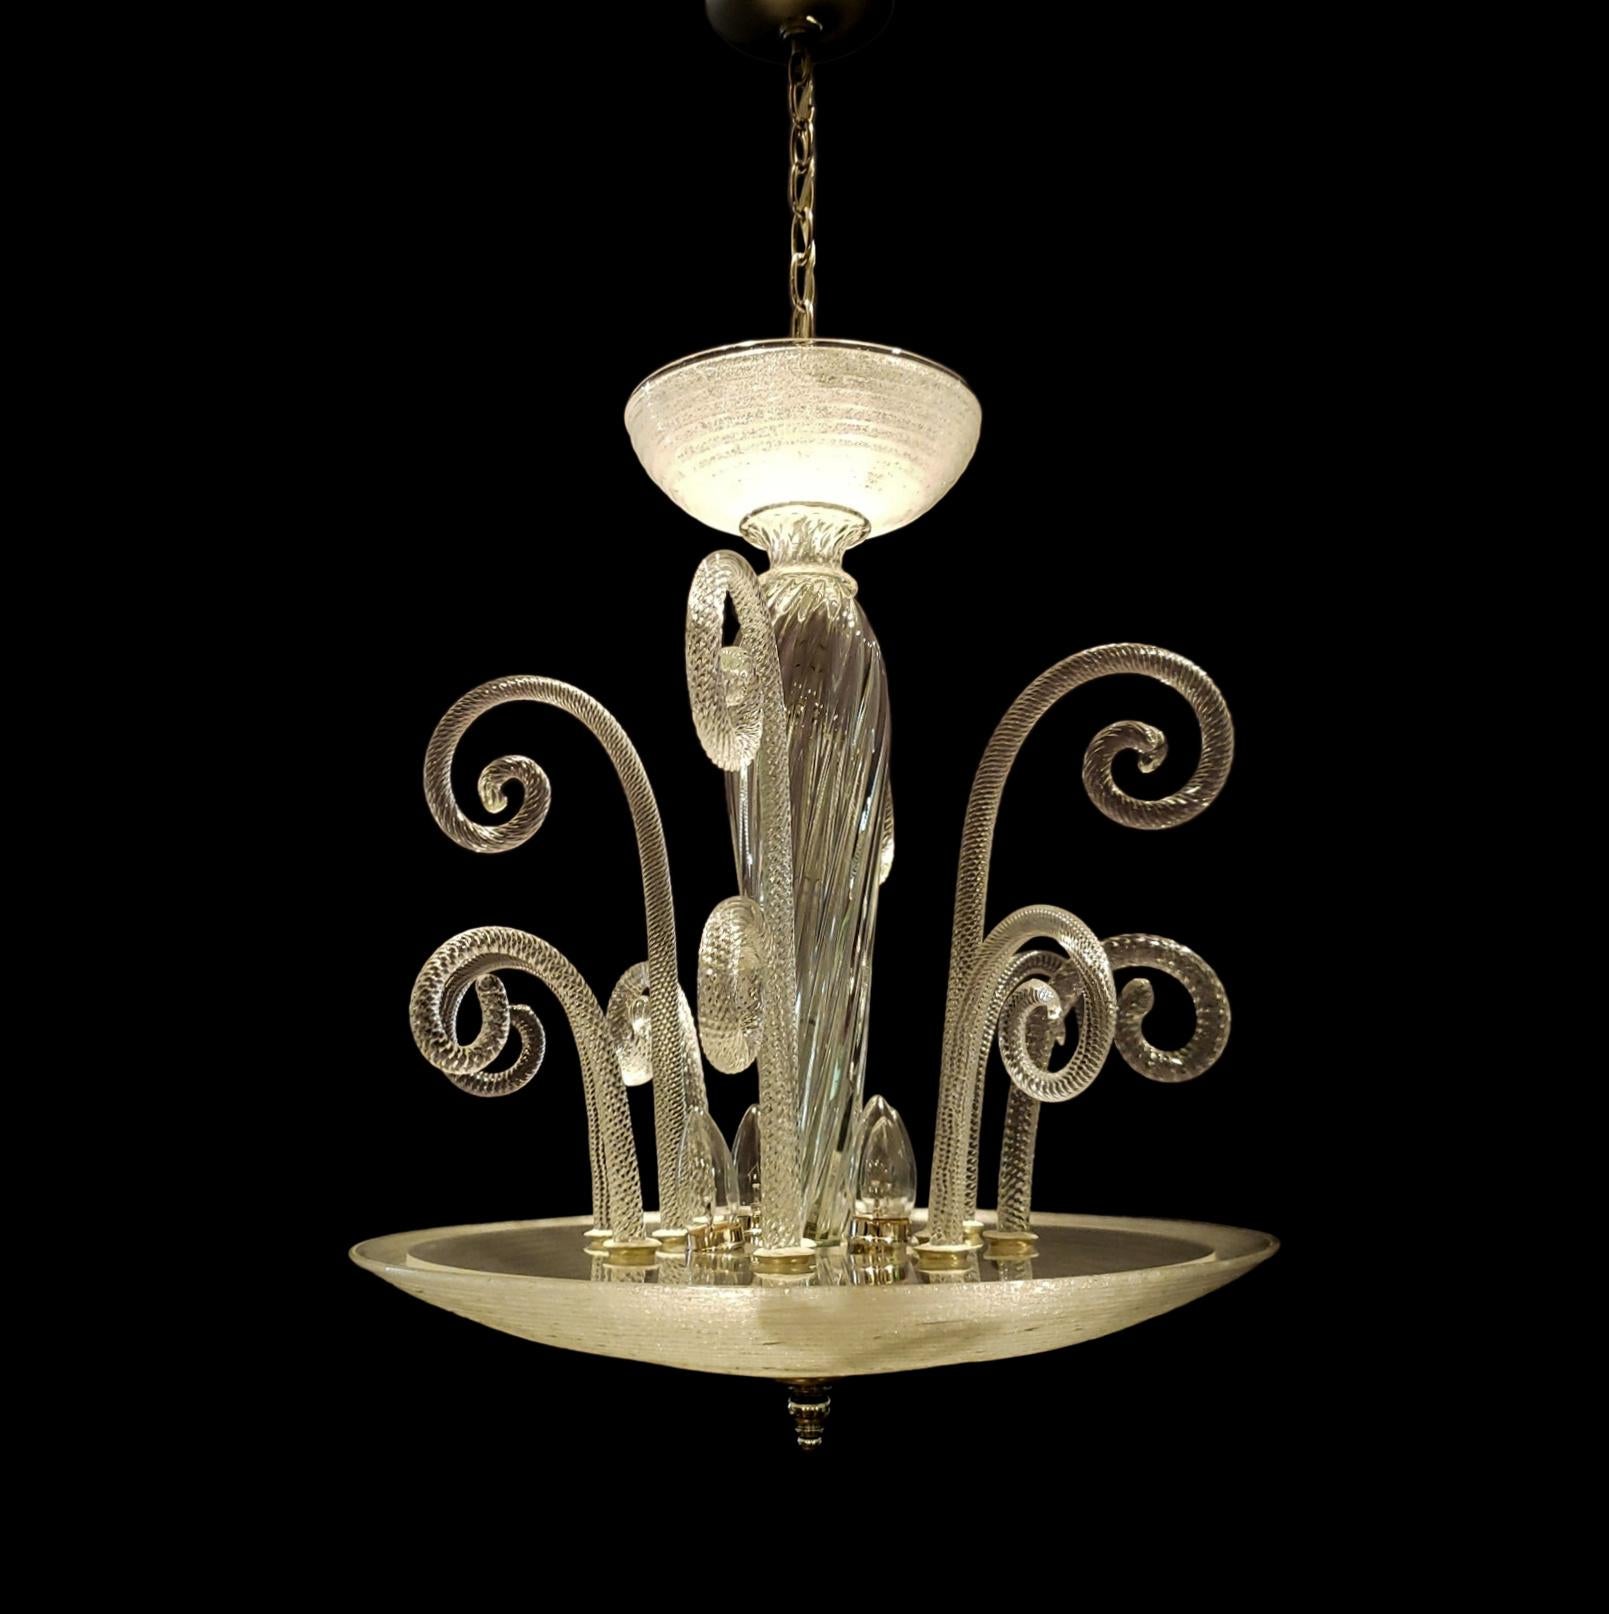 This vintage Murano chandelier features a clear ribbed bowl with twisted curls. This comes rewired and ready to install. Ships disassembled. Cleaned and restored. Please note, this item is located in our Scranton, PA location.